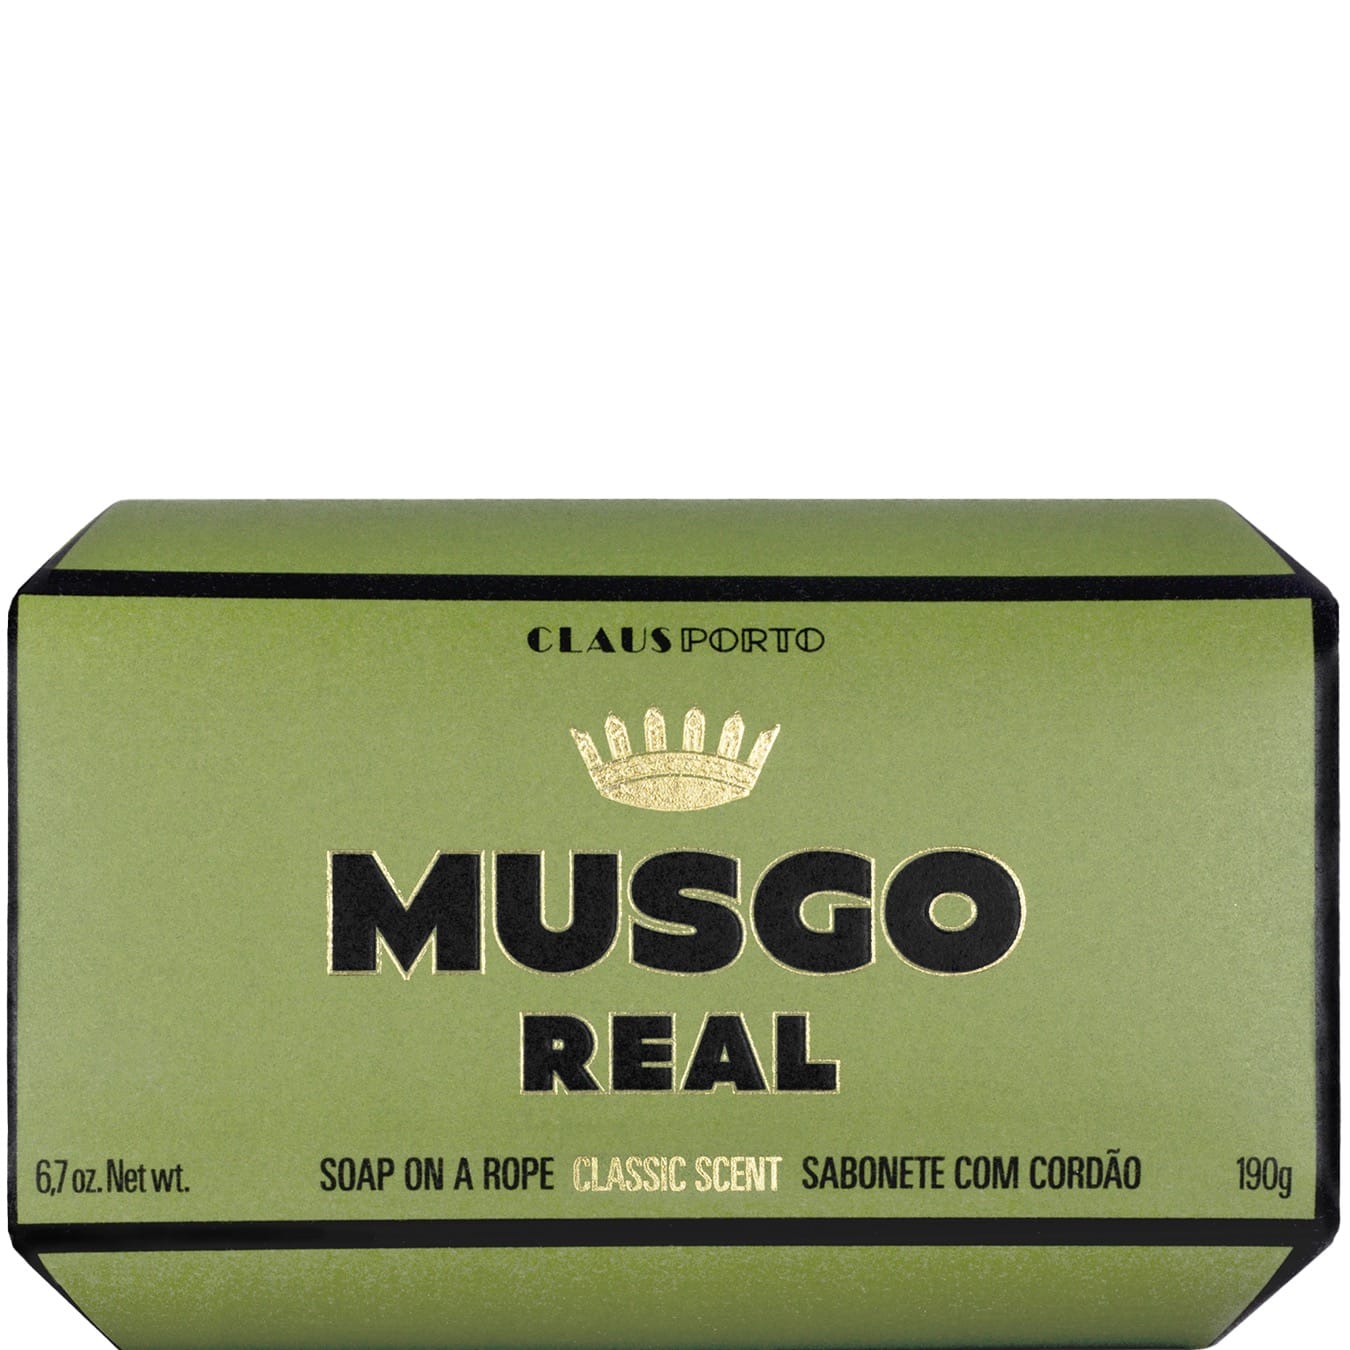 Musgo Real Soap on a Rope Classic Scent 190gr - 2.1 - MR-199CC